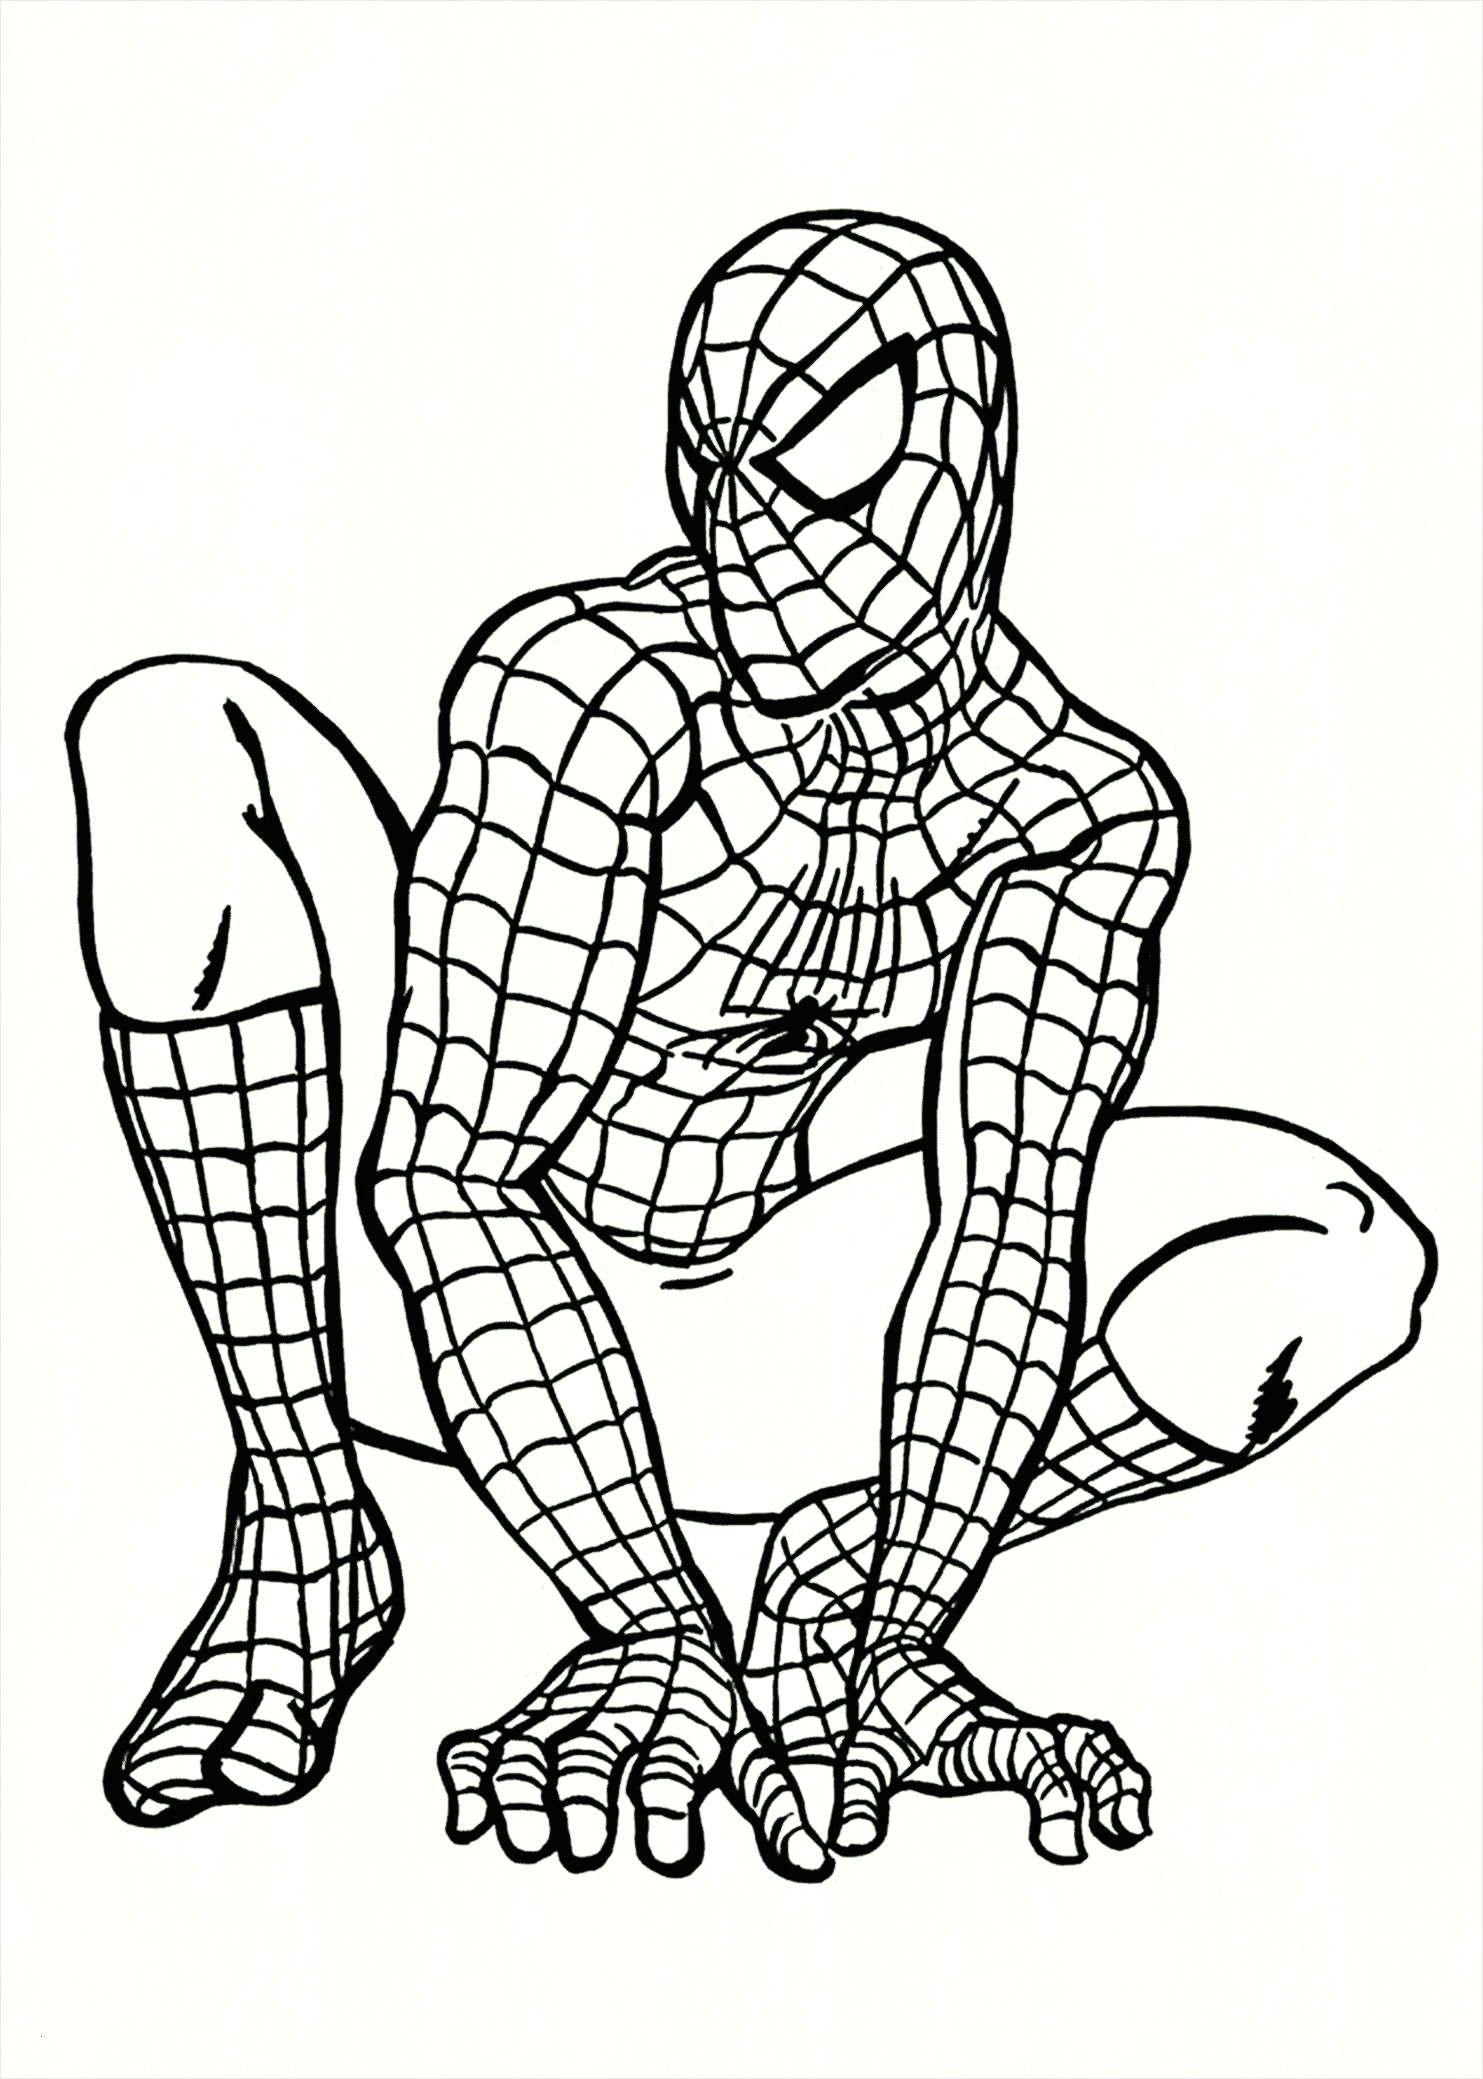 Amazing Spider Man 2 Drawing Easy Spiderman Colorare Amazing Spider Man 2 Coloring Pages Free